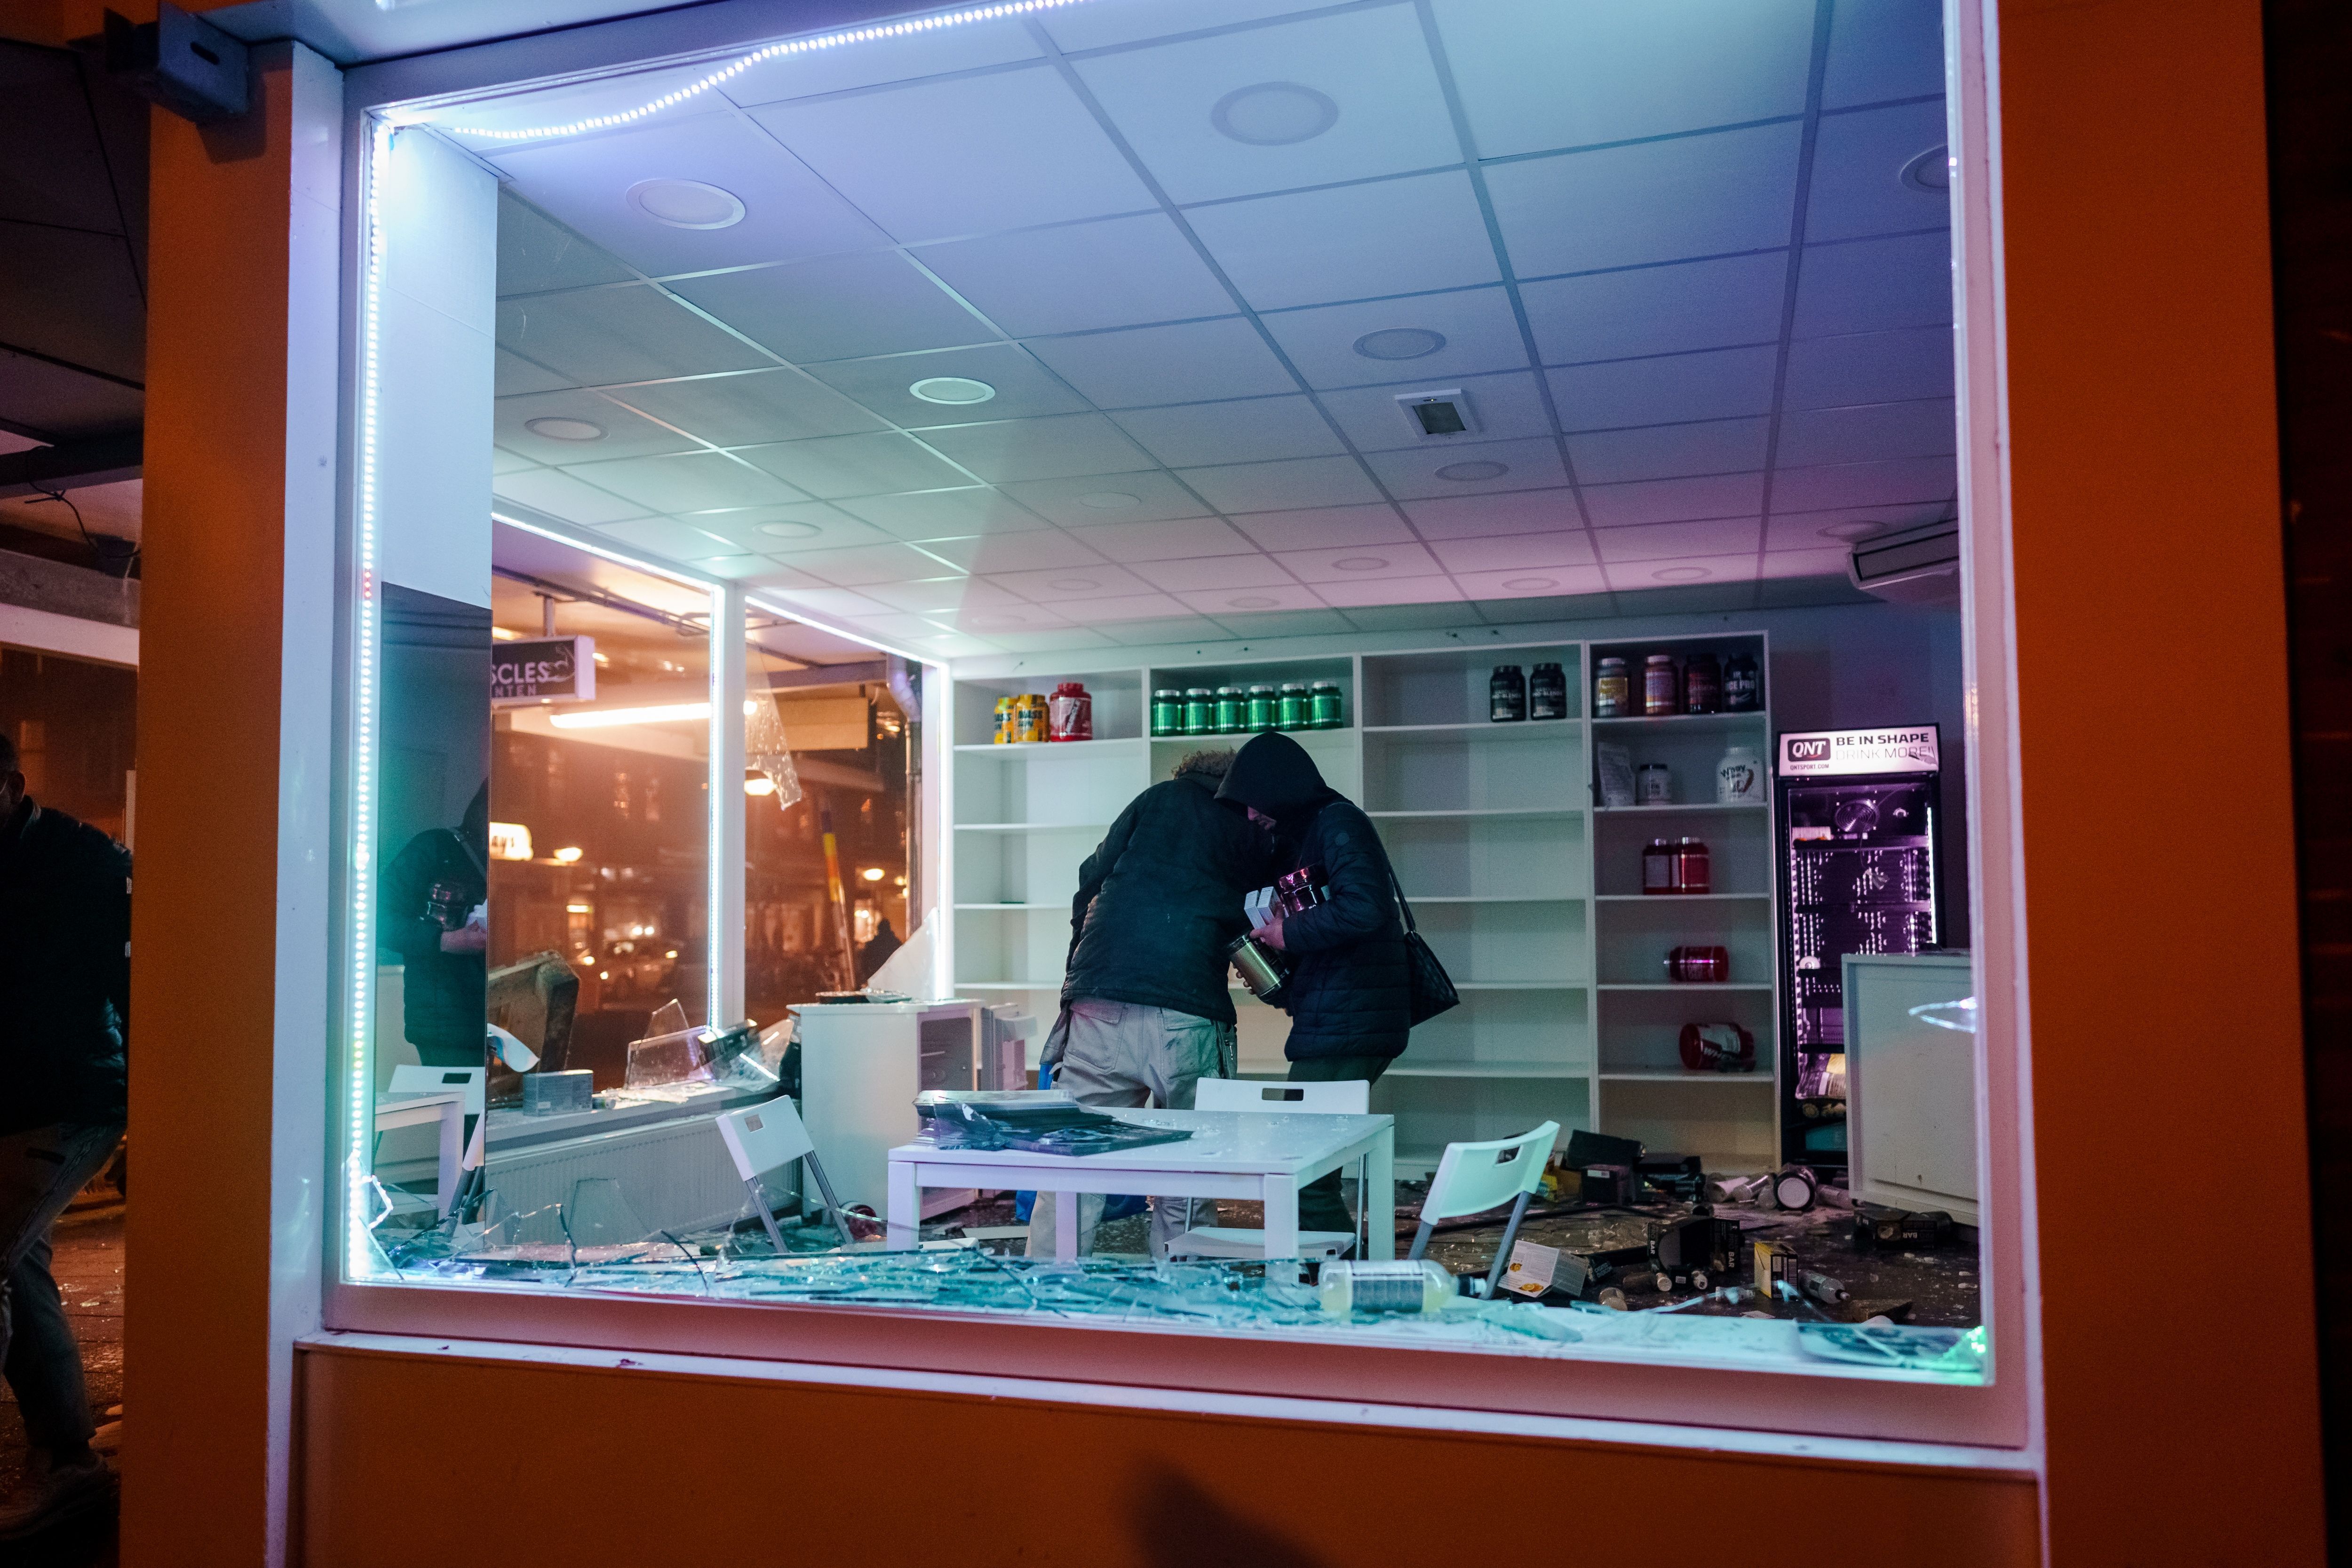 Photo of looters rummaging around in a store with broken windows